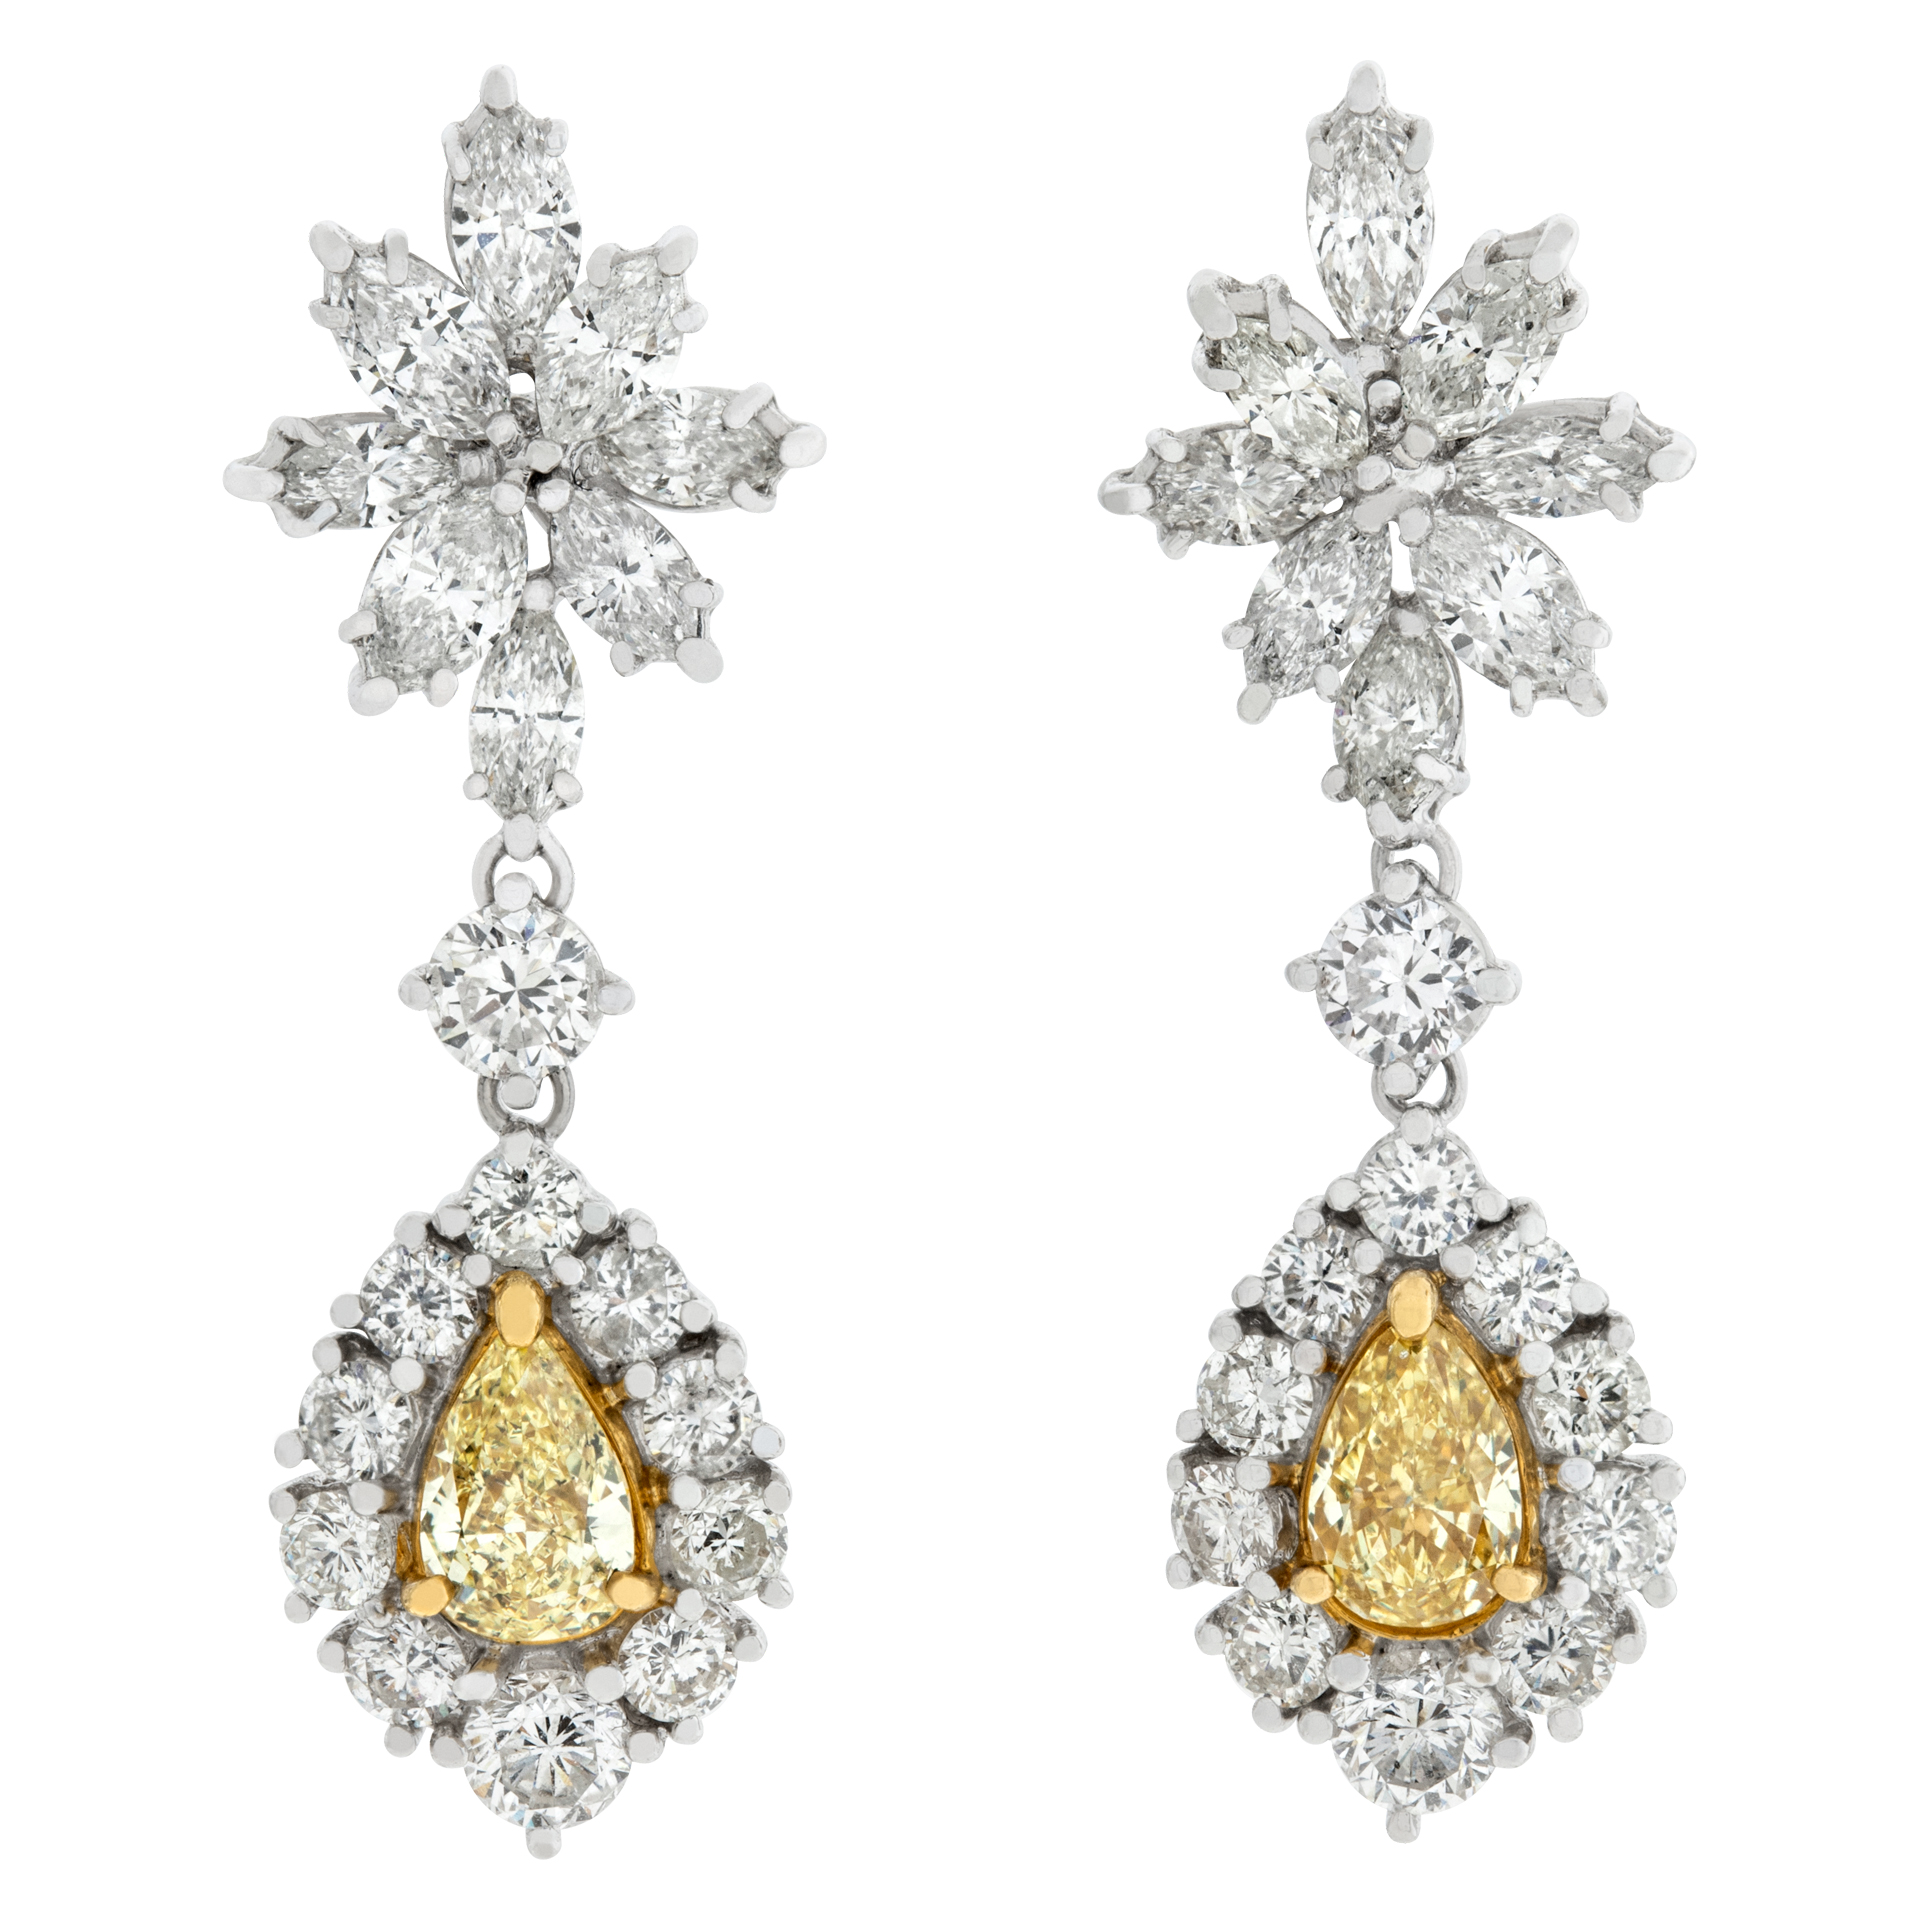 18k white gold earrings with 4.56 cts in white diamonds and 1.27 cts in fancy yellow diamonds image 1